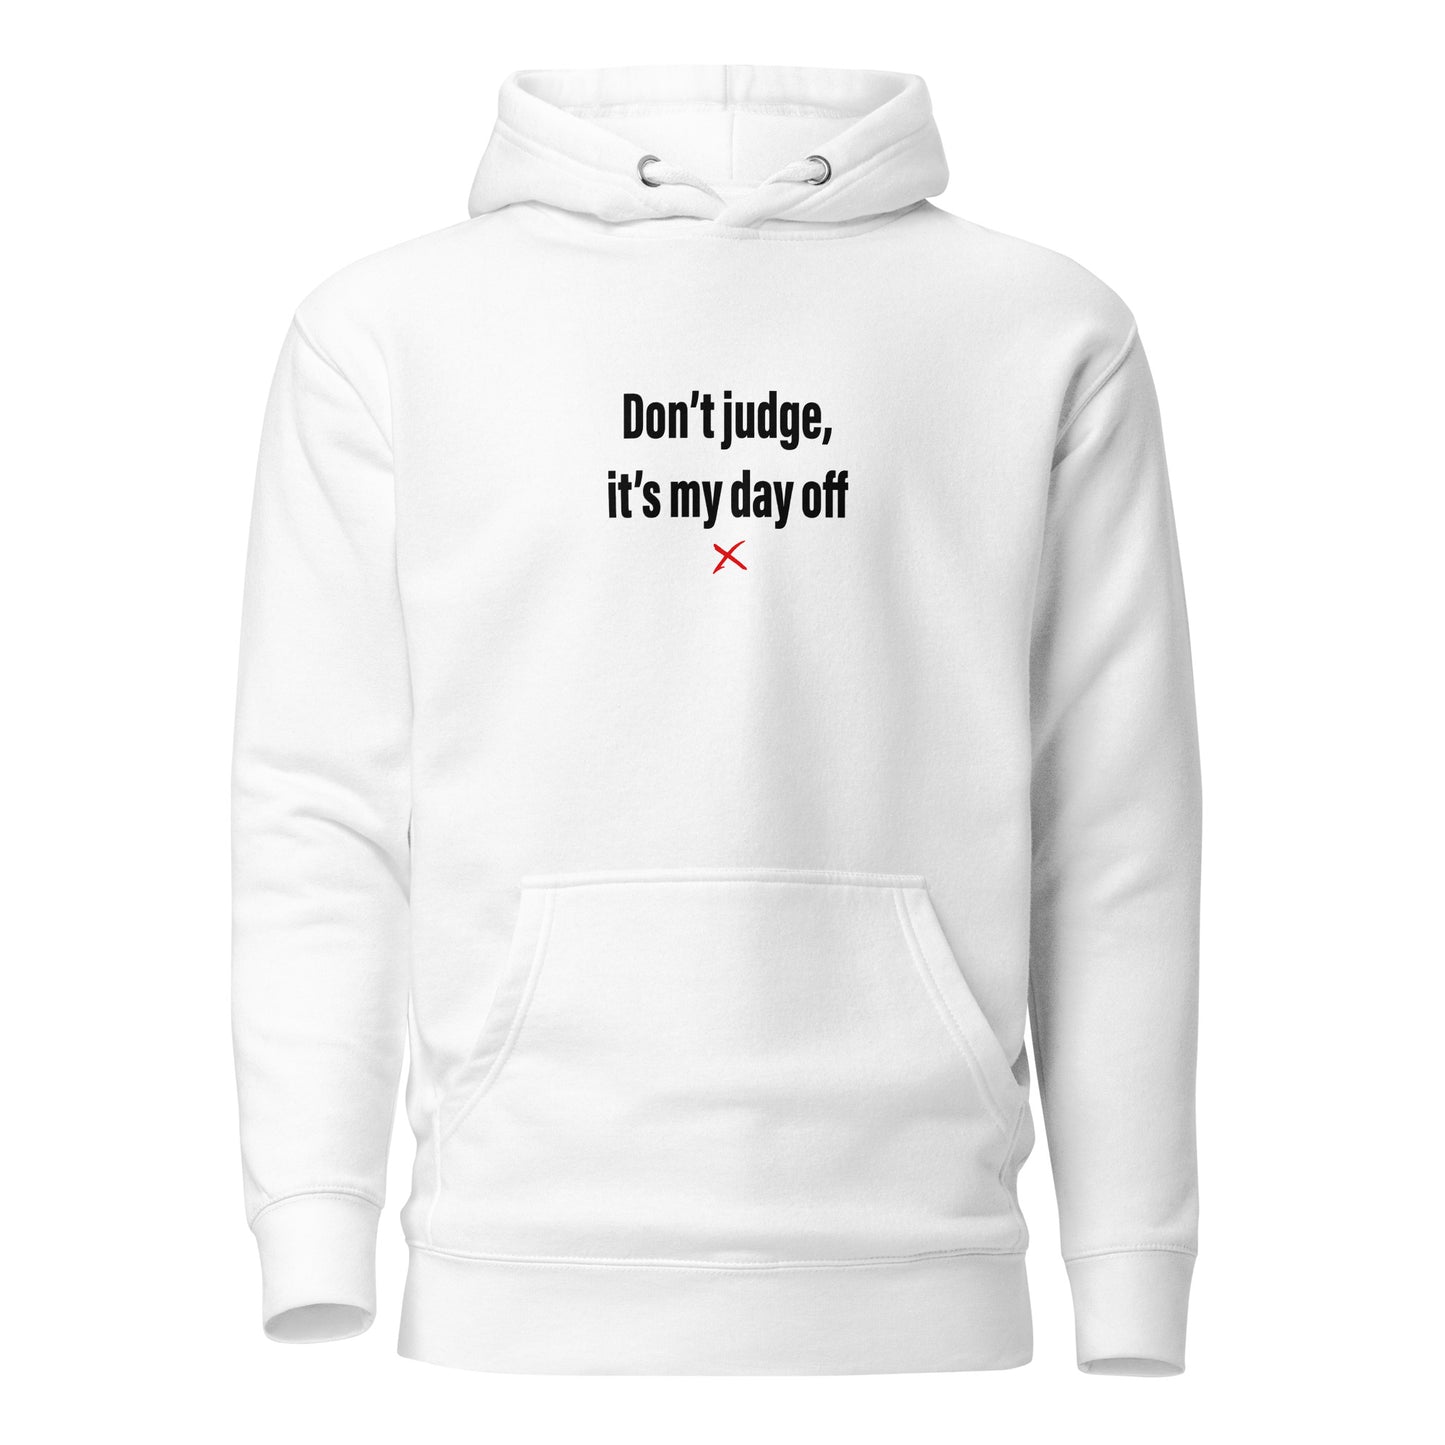 Don't judge, it's my day off - Hoodie